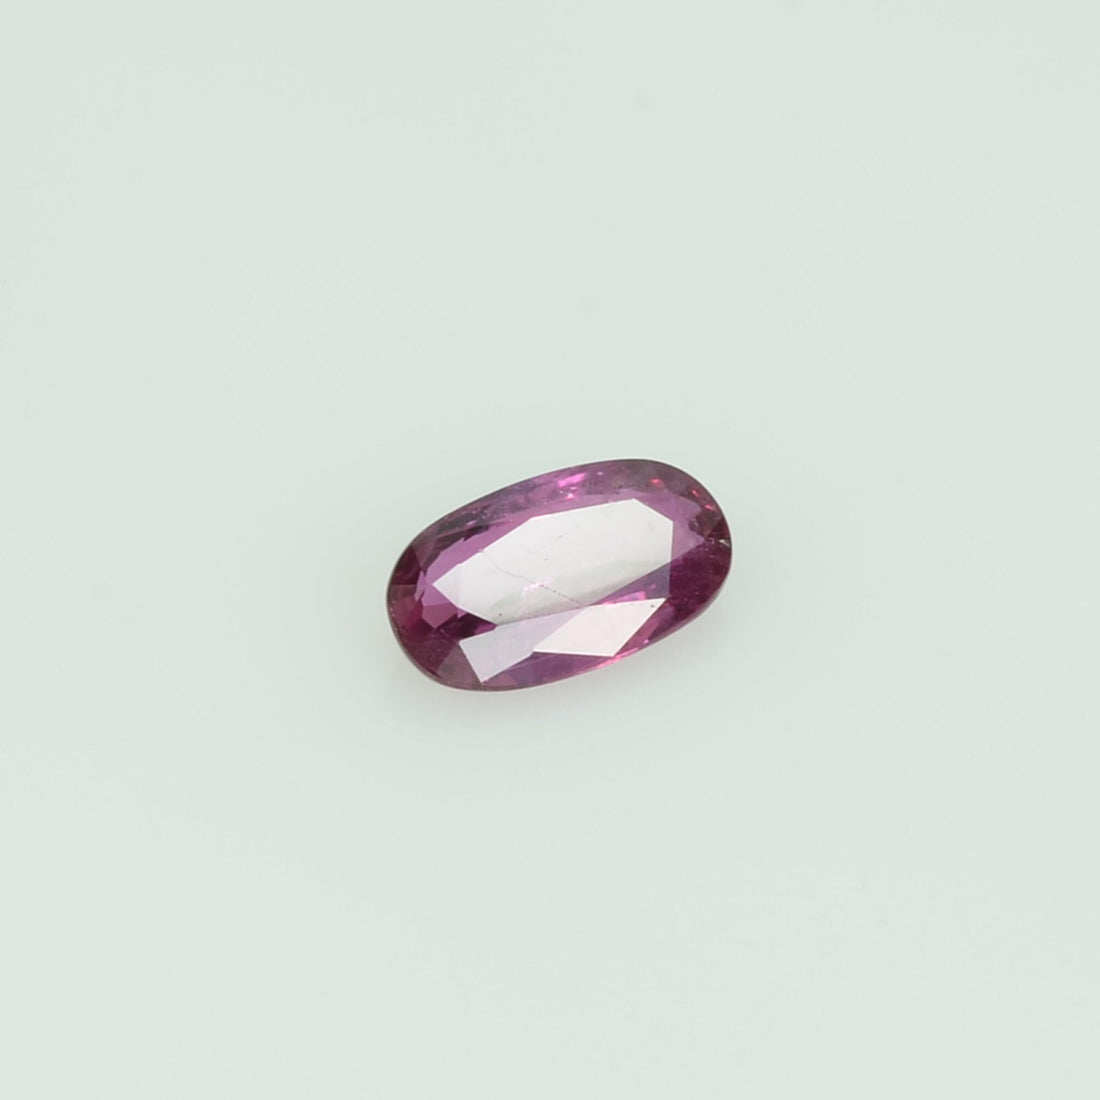 0.40 Cts Natural Thai Ruby Loose Gemstone Oval Cut